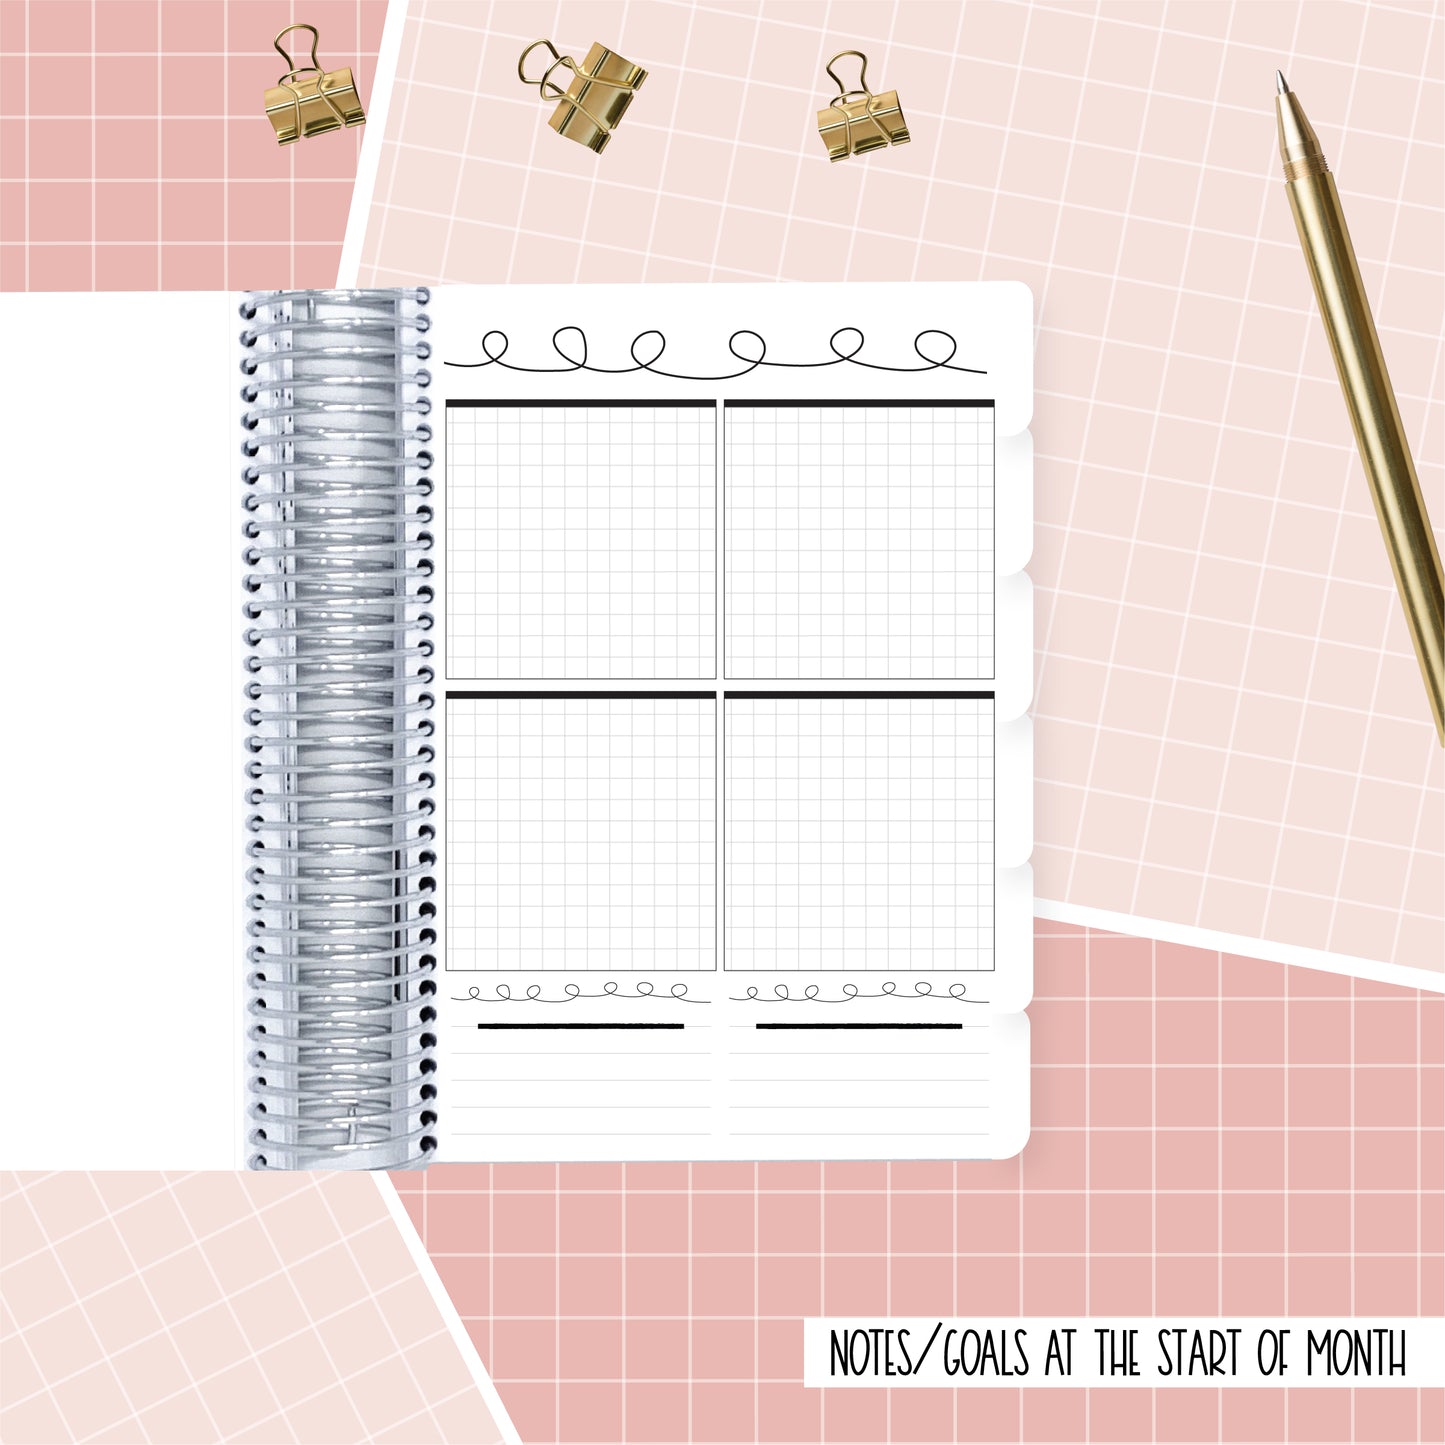 Choose to Shine - A5 Monthly Planner